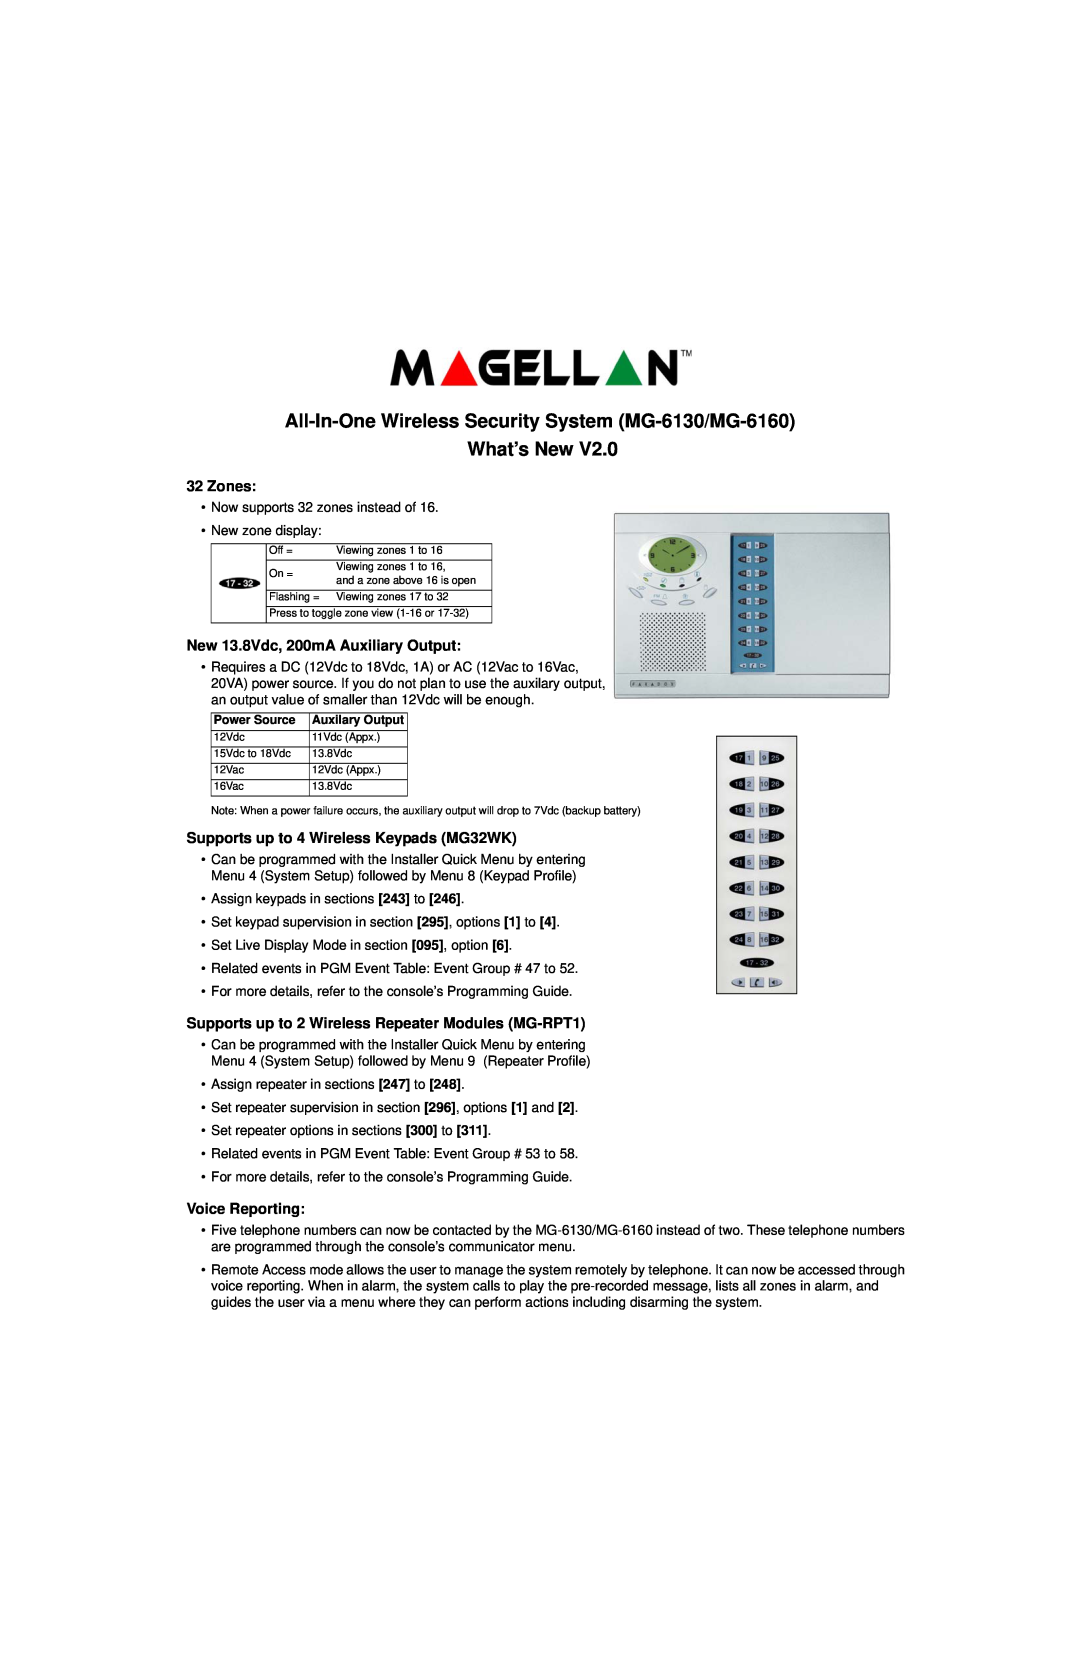 Magellan MG-6130 manual 32Zones, New 13.8Vdc, 200mA Auxiliary Output, Supports up to 4 Wireless Keypads MG32WK, What’s New 